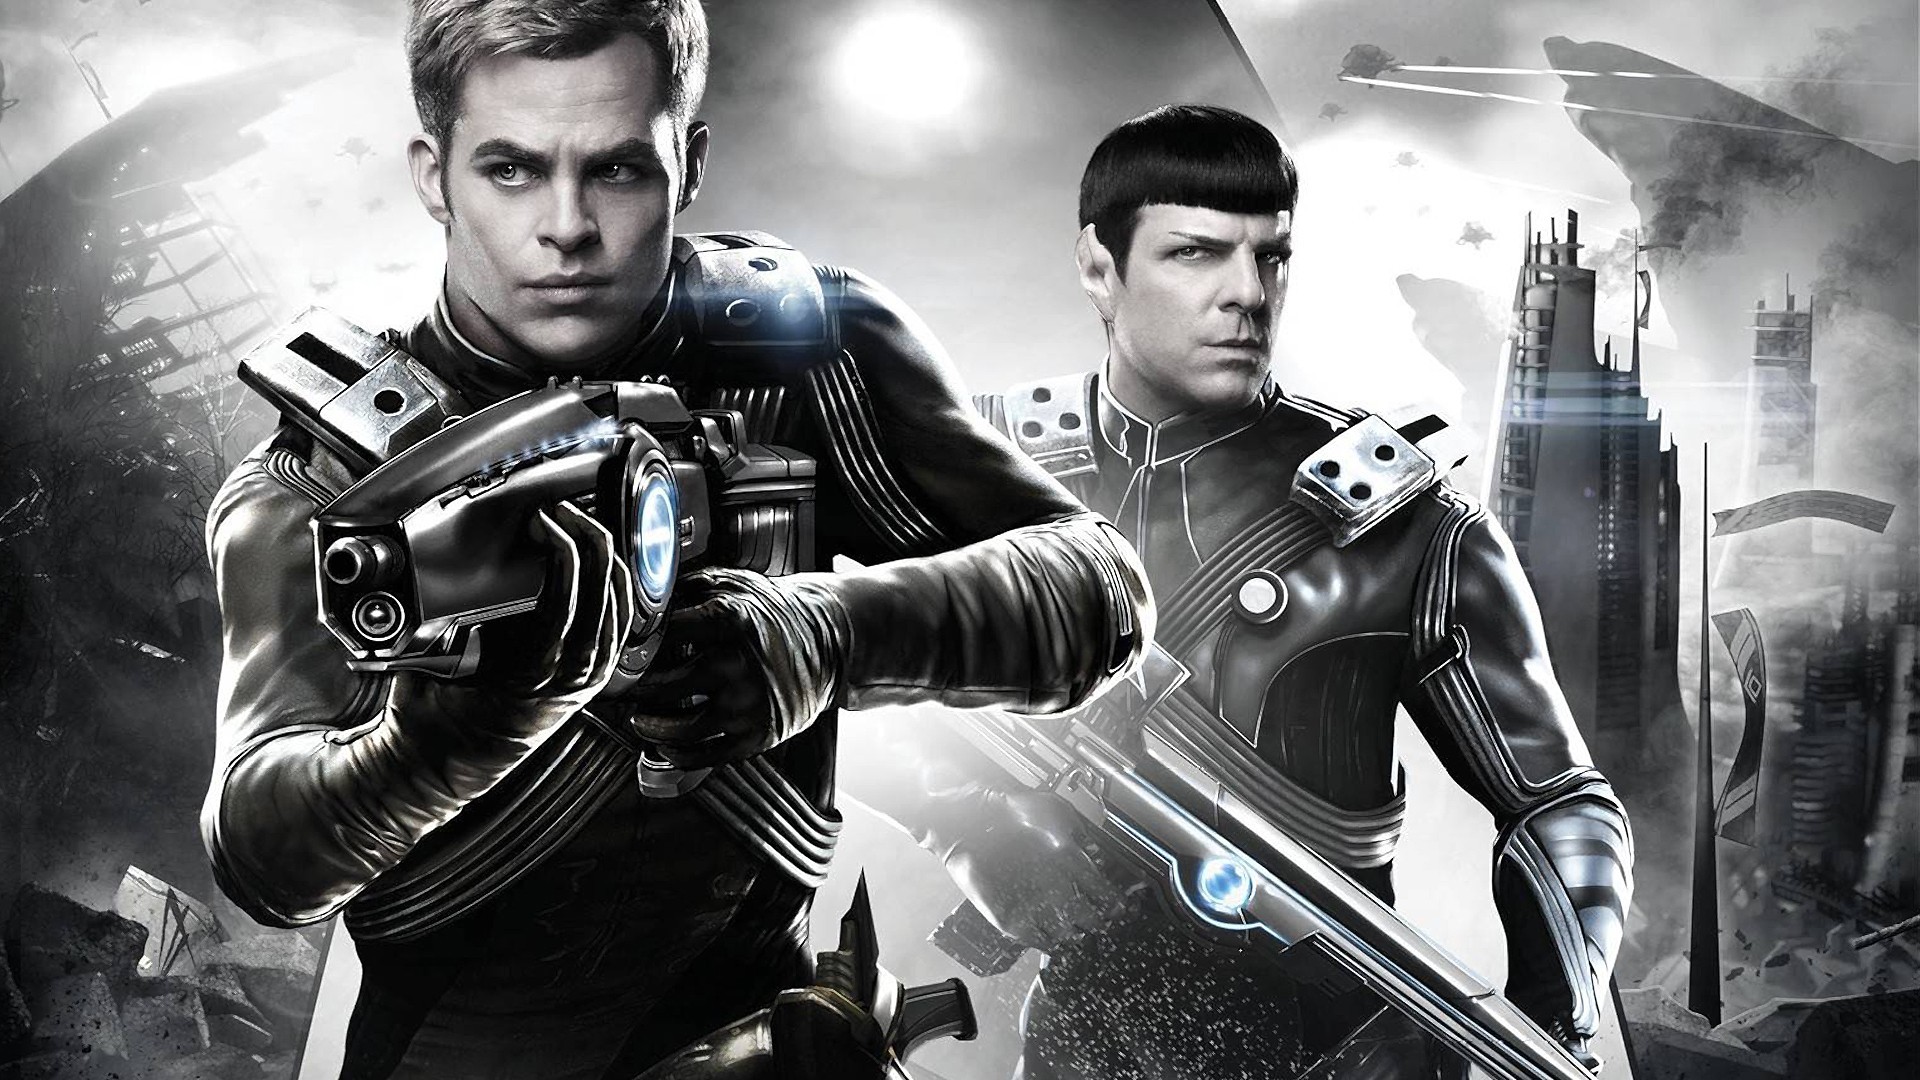 movies monochrome star trek into darkness chris pine zachary quinto spock james t kirk Wallpaper HD / Desktop and Mobile Background